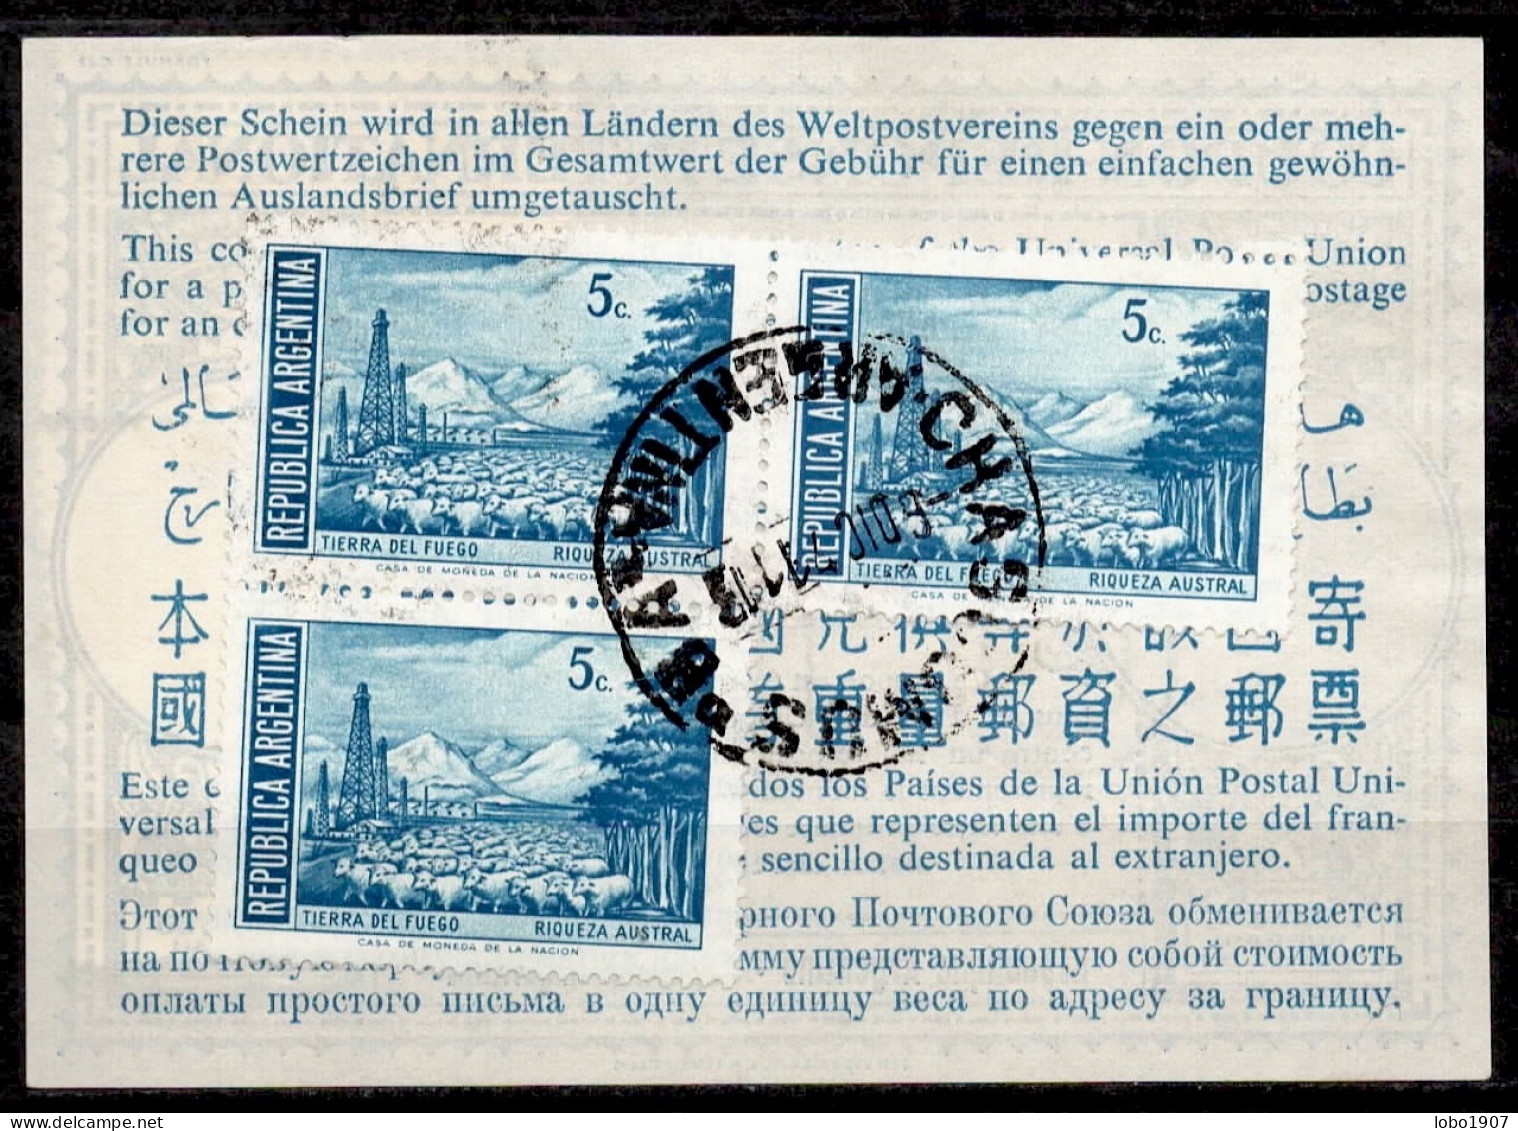 ARGENTINE ARGENTINA Lo16u  M$.12 / 1 PESO + Stamps 88 Pesos International Reply Coupon Reponse Antwortschein IRC IAS - Postal Stationery